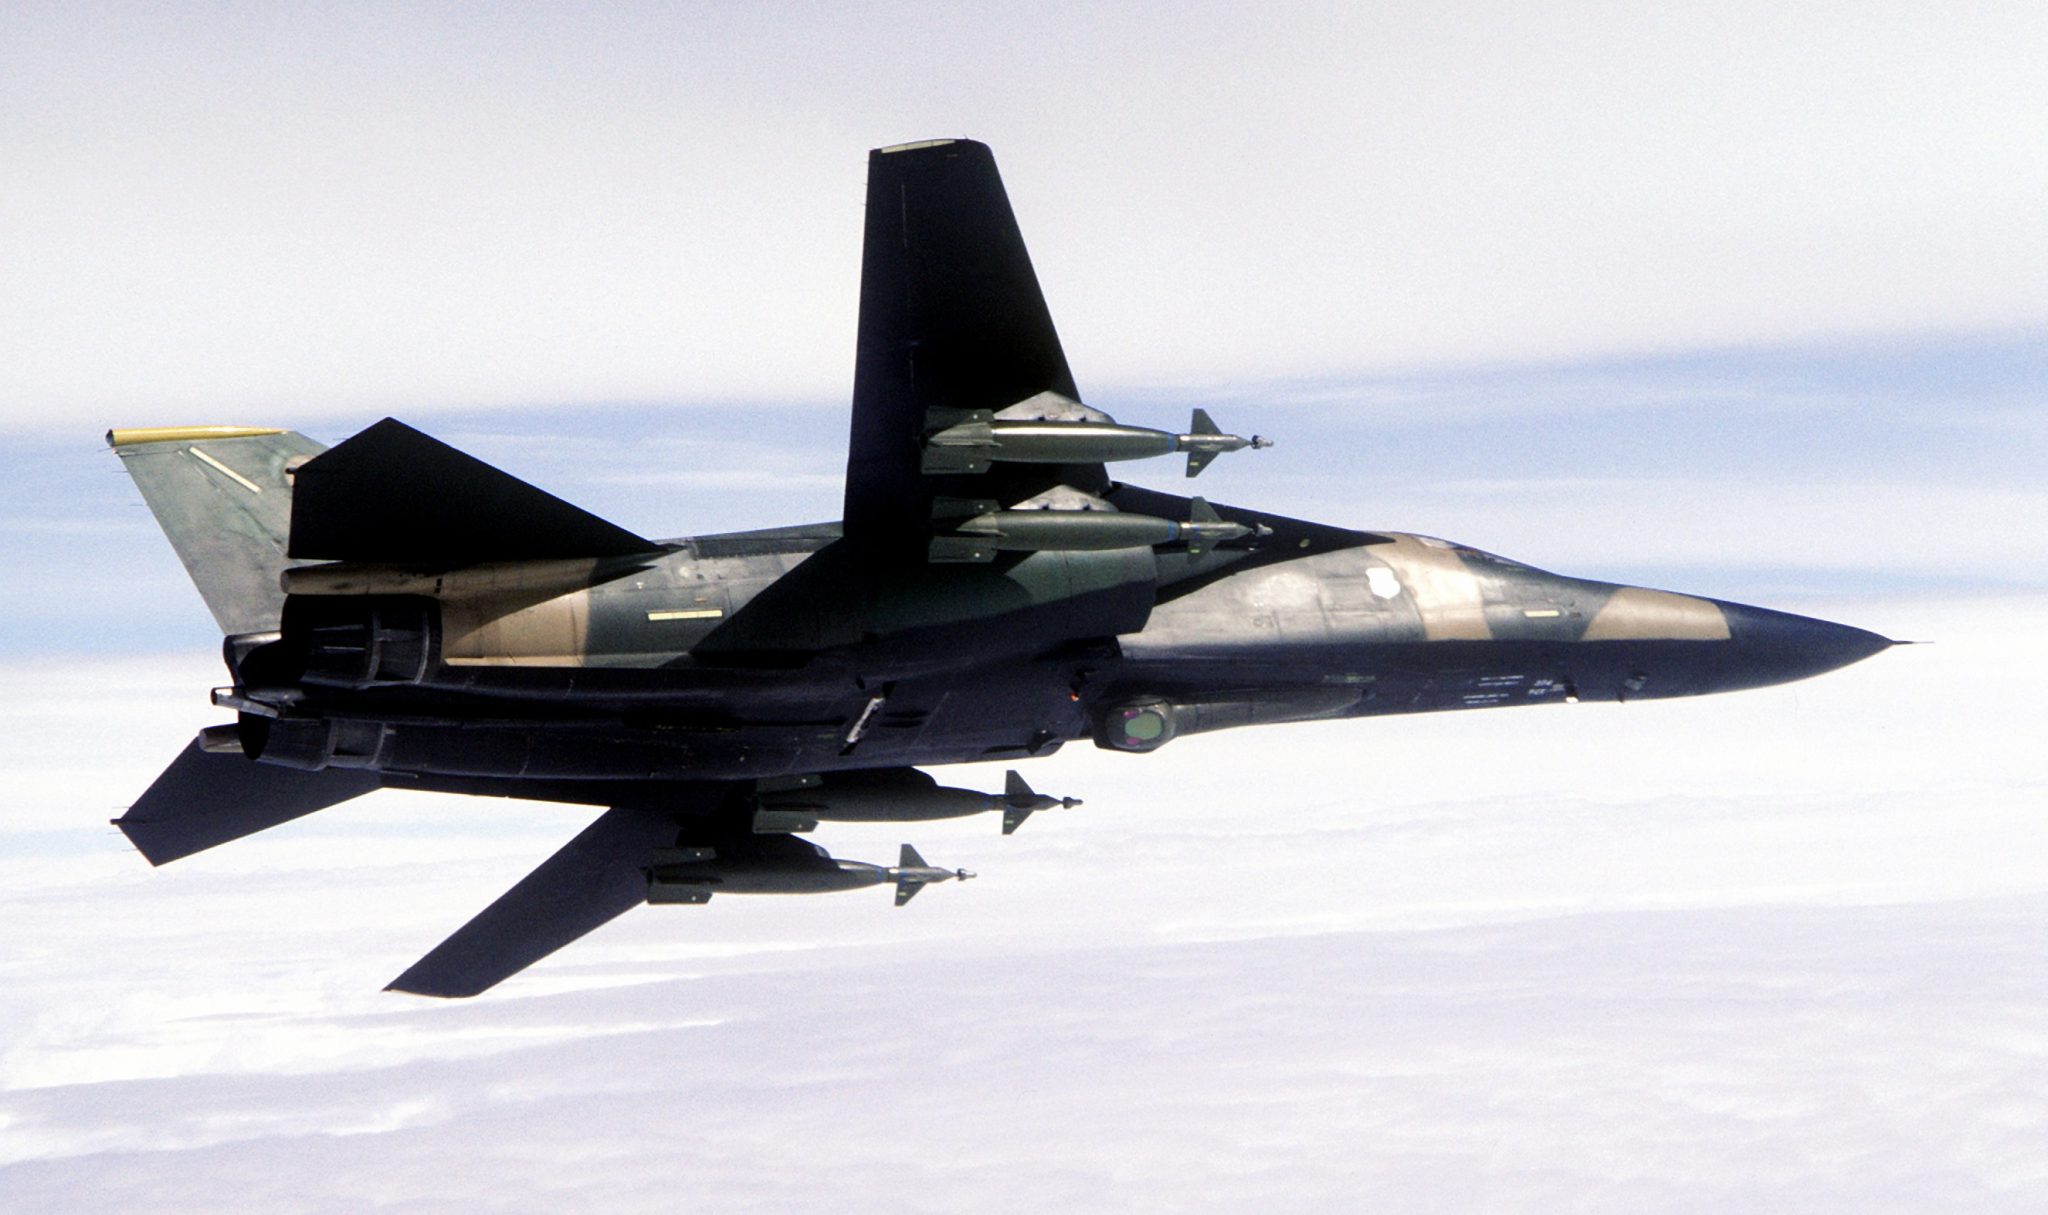 The F-111 Could Go In Low And Fast Because Of What Was In That Long Nose